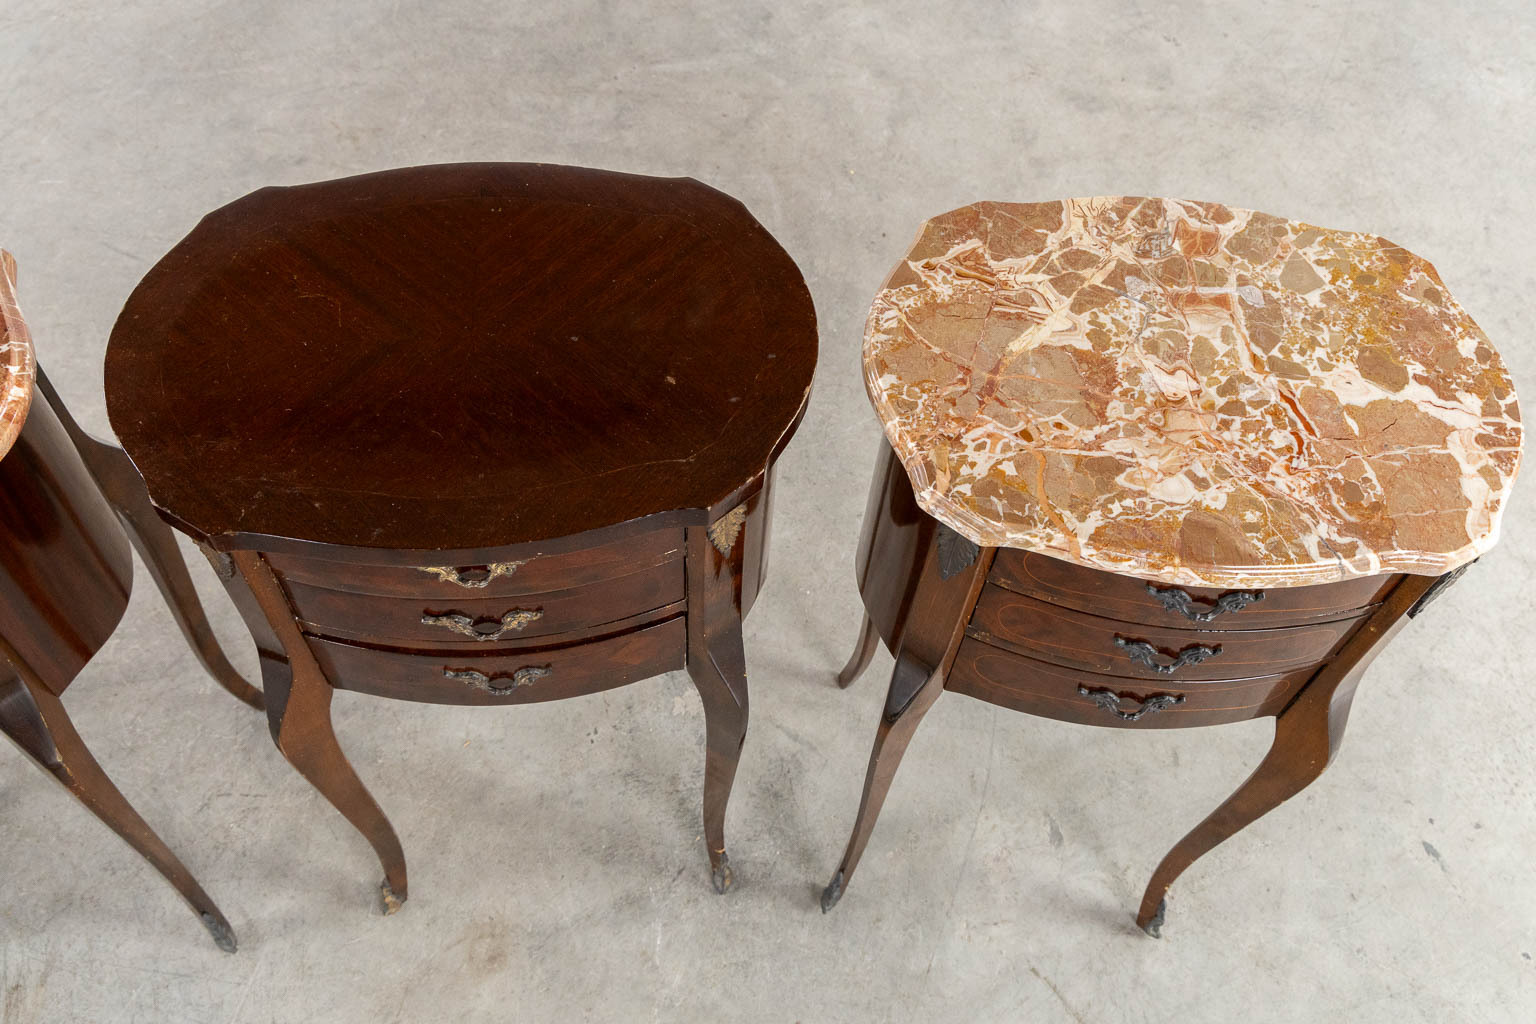 Five side tables or nightstands. (L:27 x W:40 x H:72 cm)